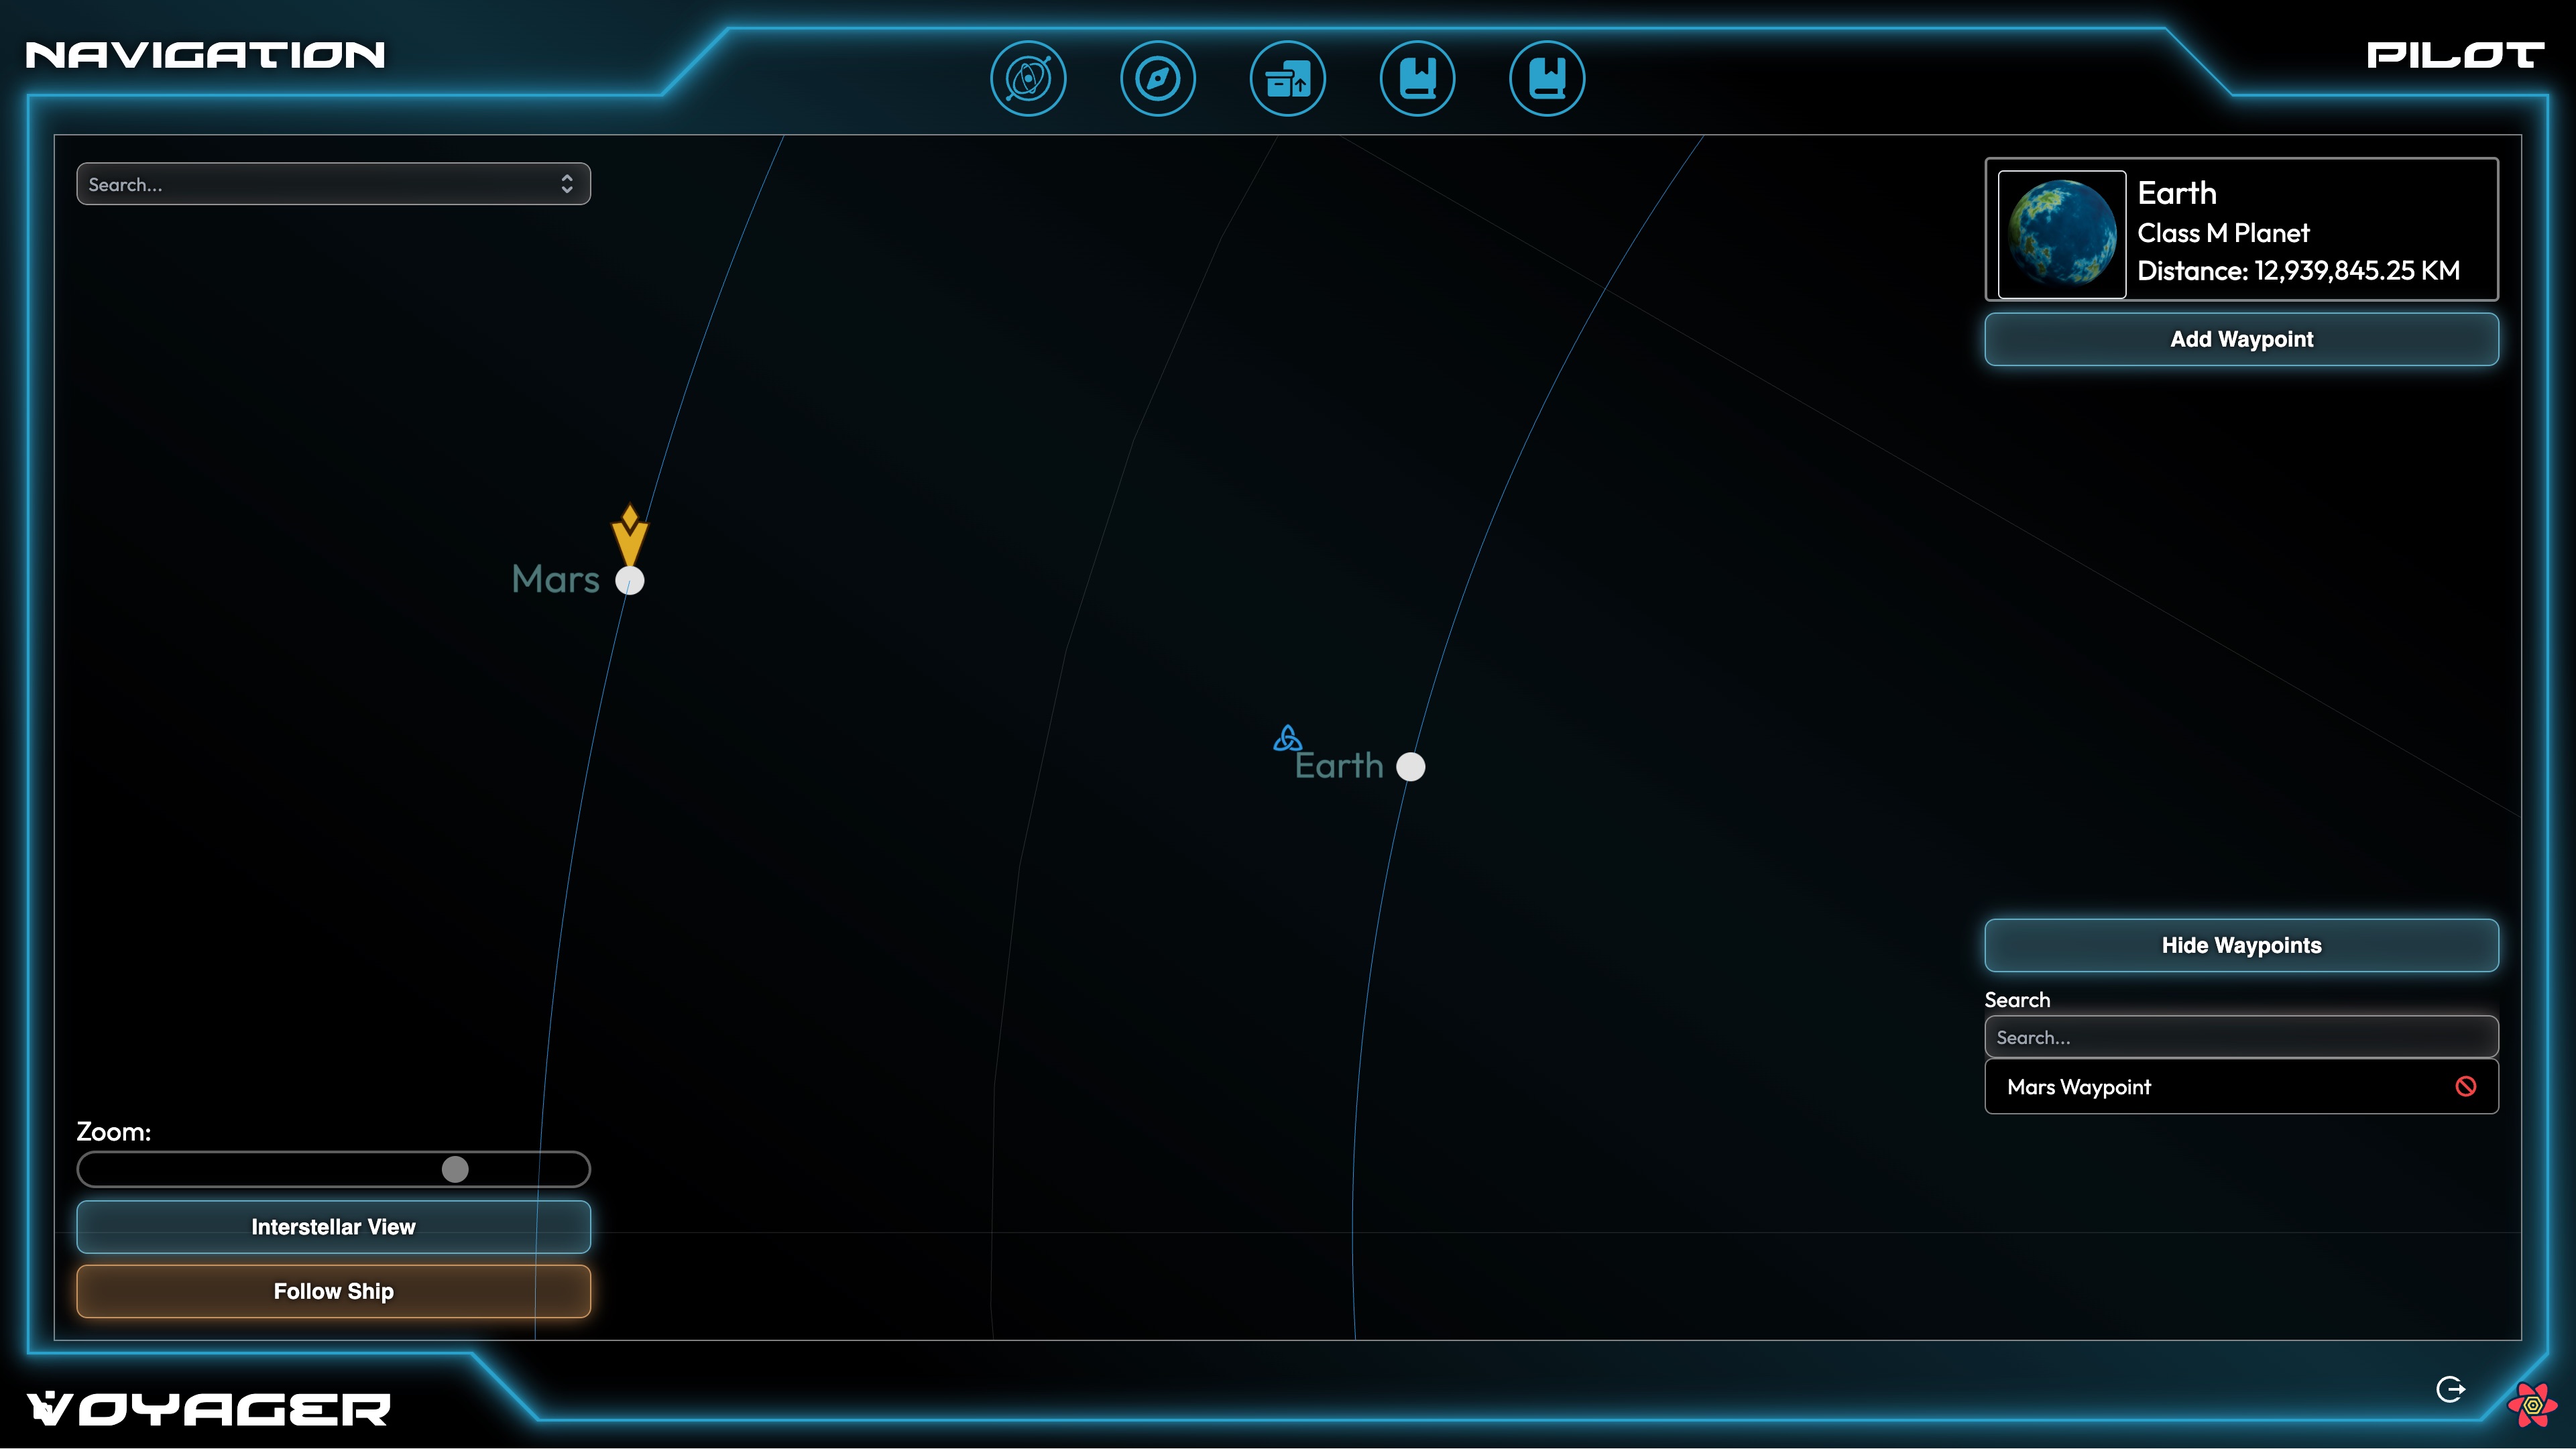 The navigation screen lets the crew set course and see the ship's position.